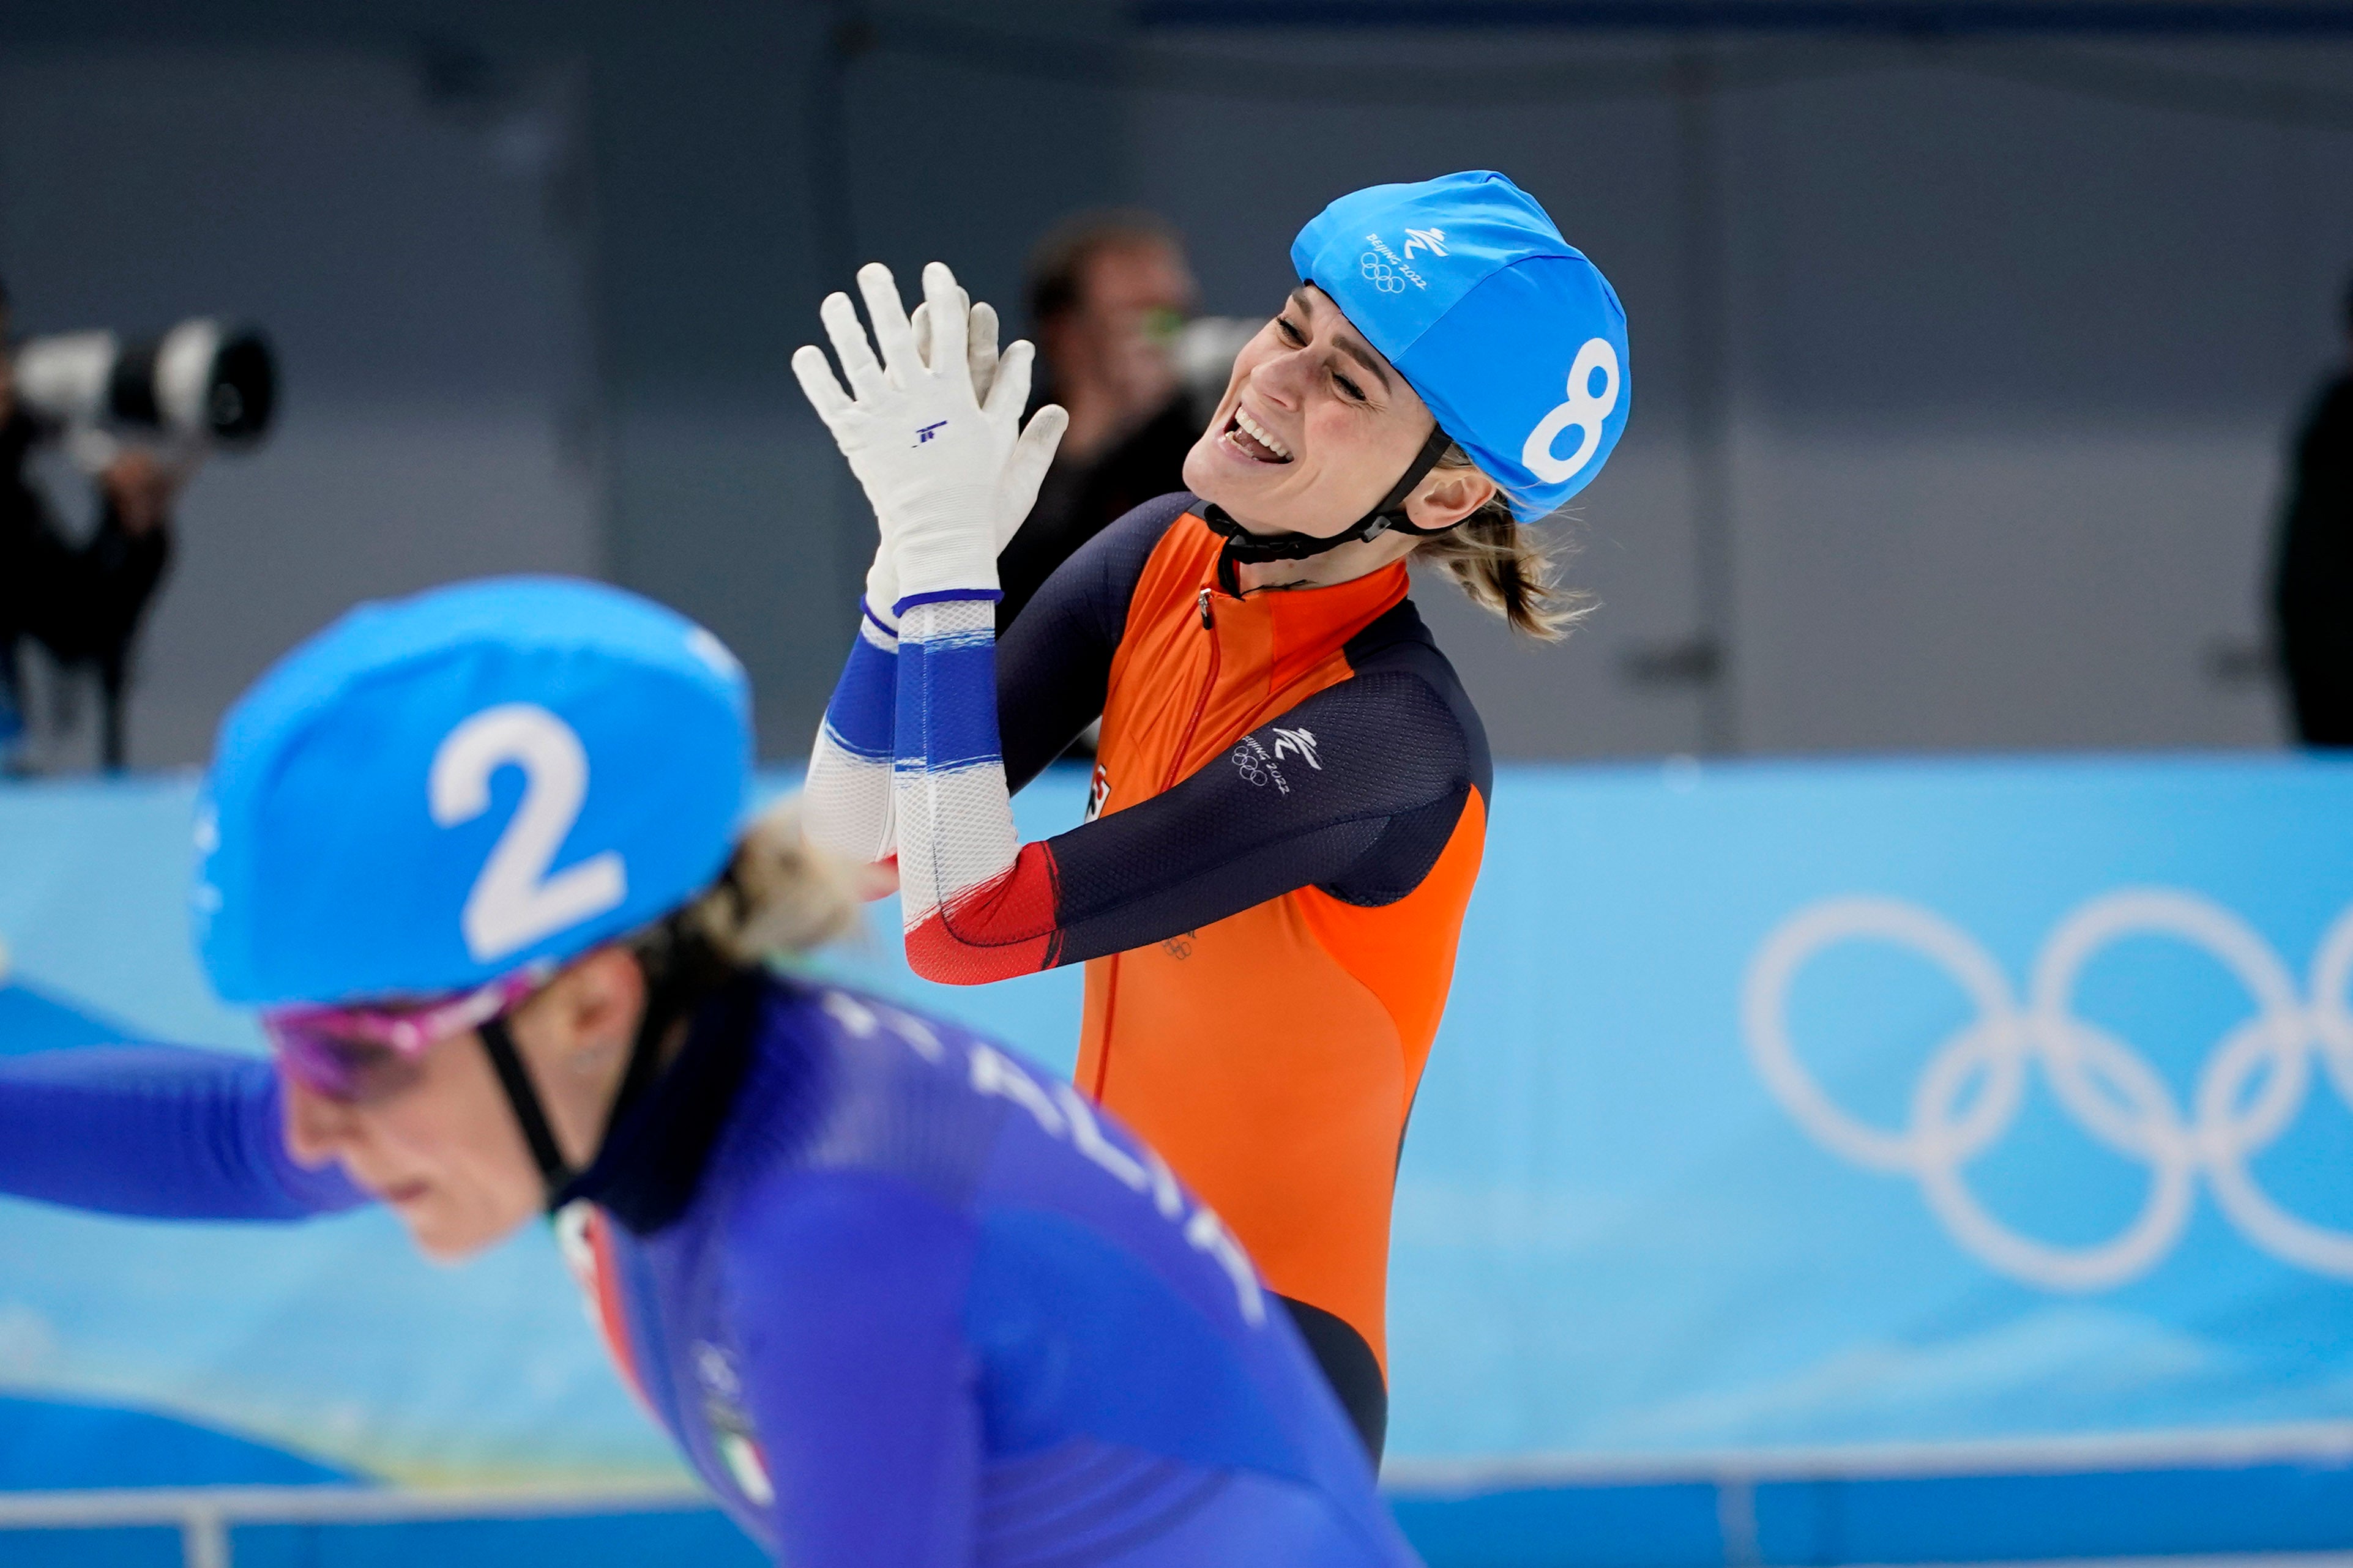 Irene Schouten of the Netherlands reacts after winning the gold